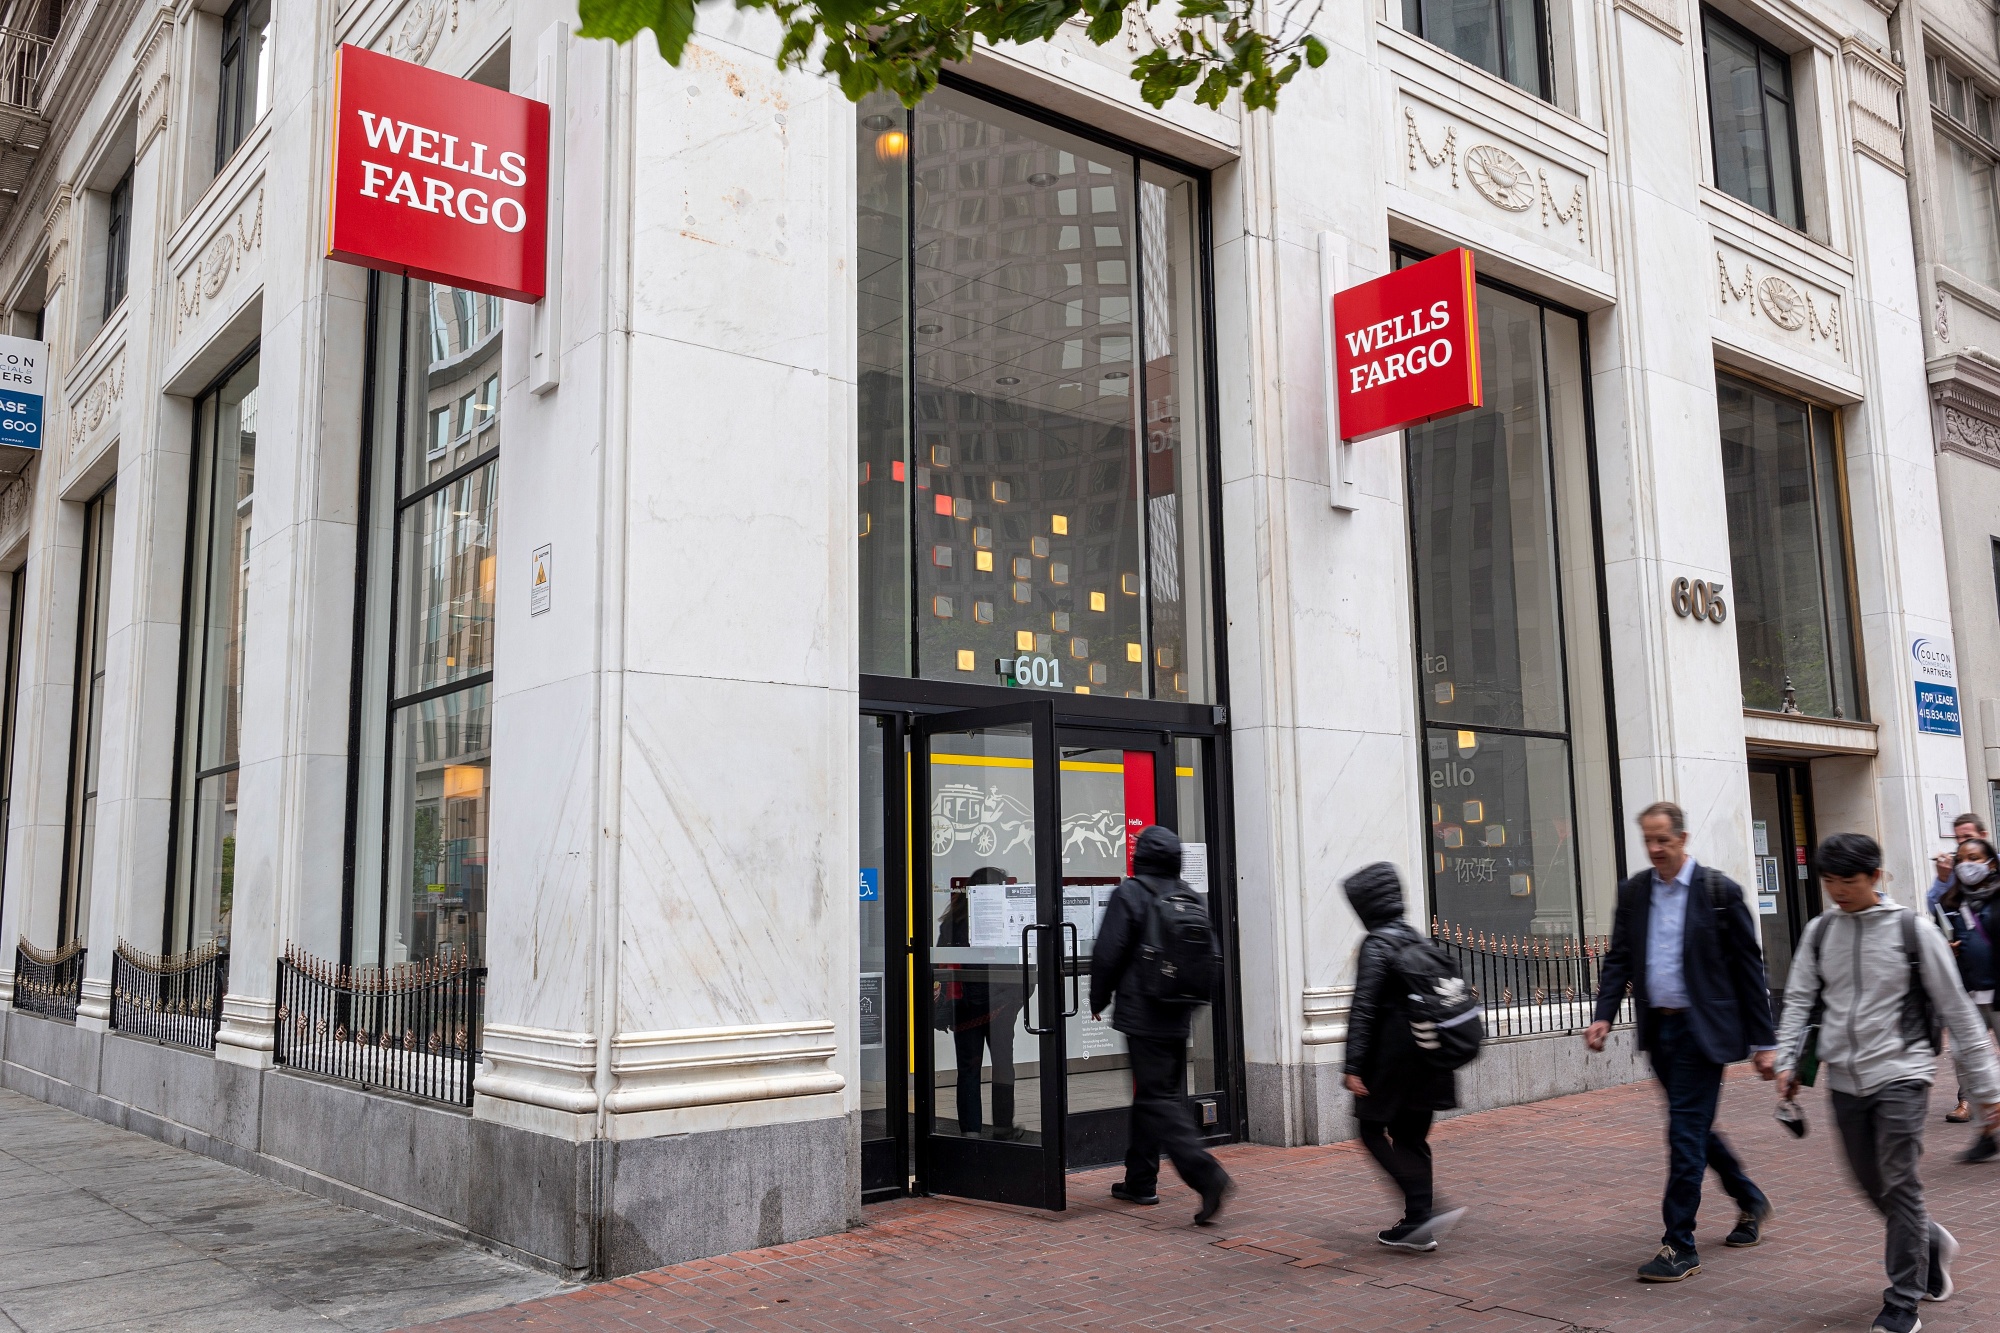 A Wells Fargo bank branch in San Francisco, California, U.S., on Monday, July 12, 2021. Wells Fargo & Co. is expected to release earnings figures on July 14.